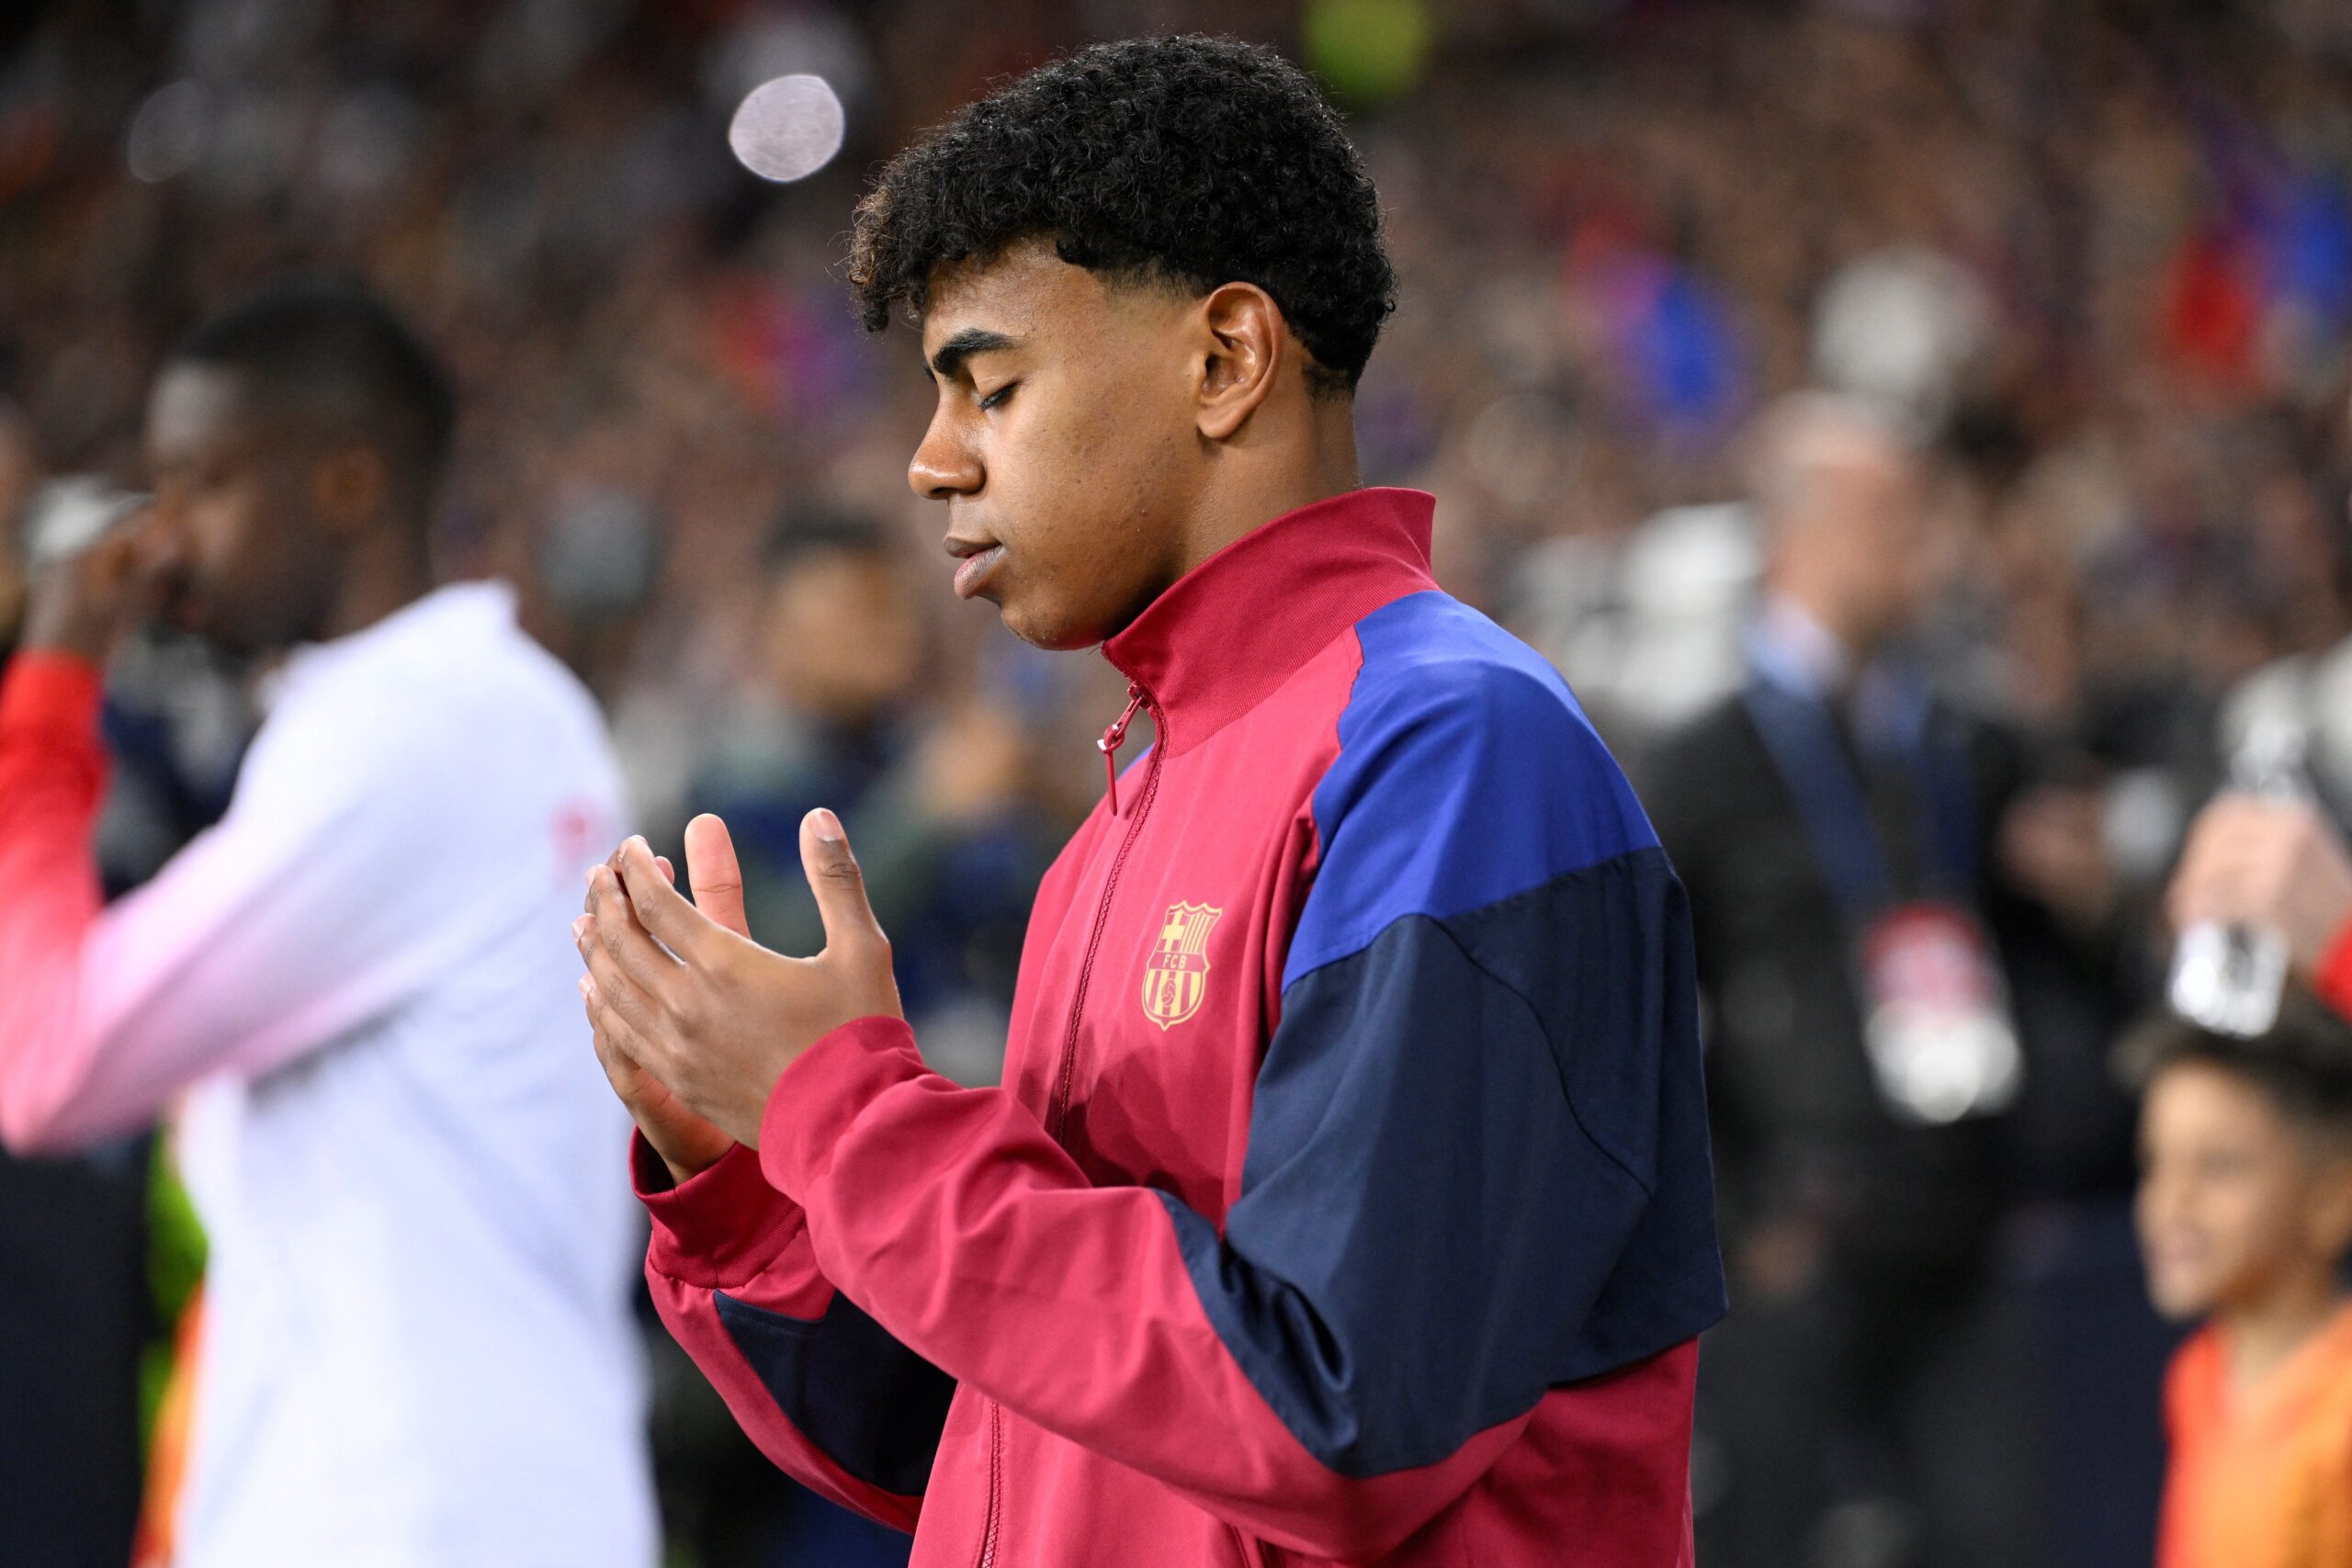 Barcelona's Spanish forward #27 Lamine Yamal prays as he enters the pitch during the UEFA Champions League quarter-final second leg football match between FC Barcelona and Paris SG at the Estadi Olimpic Lluis Companys in Barcelona on April 16, 2024.